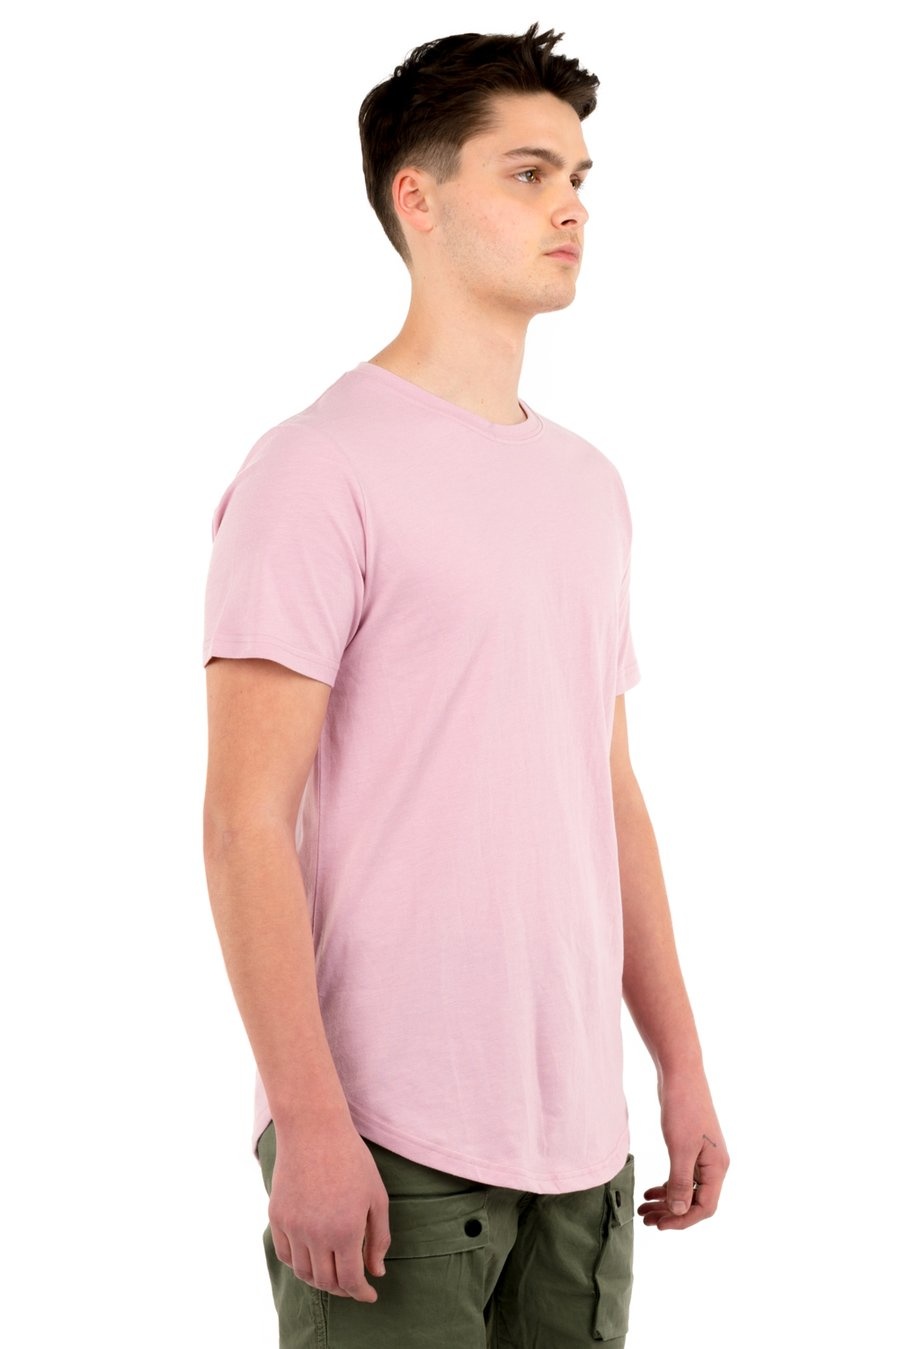 KUWALLA EAZY SCOOP SS TEE DUSTY PINK(DUPK) - Laces